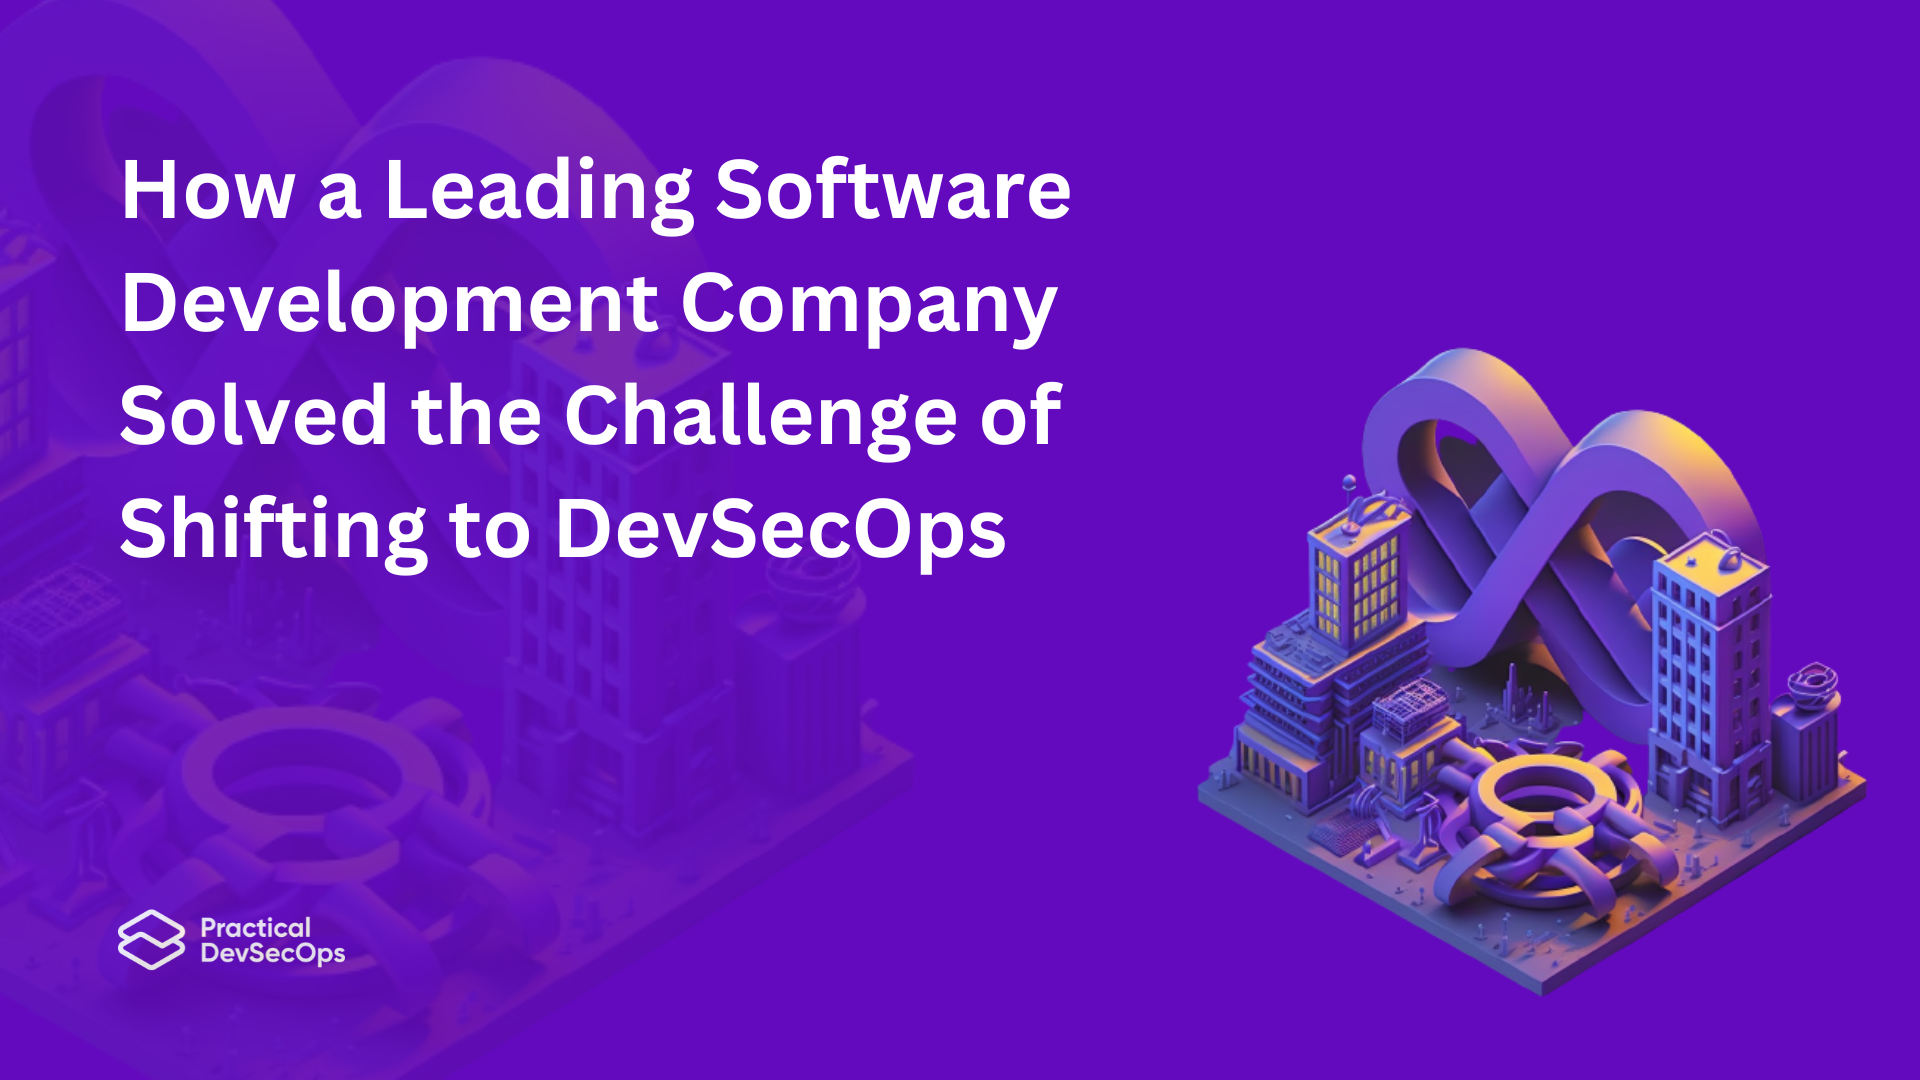 How a Leading software development company solved the challenge of shifting to DevSecOps